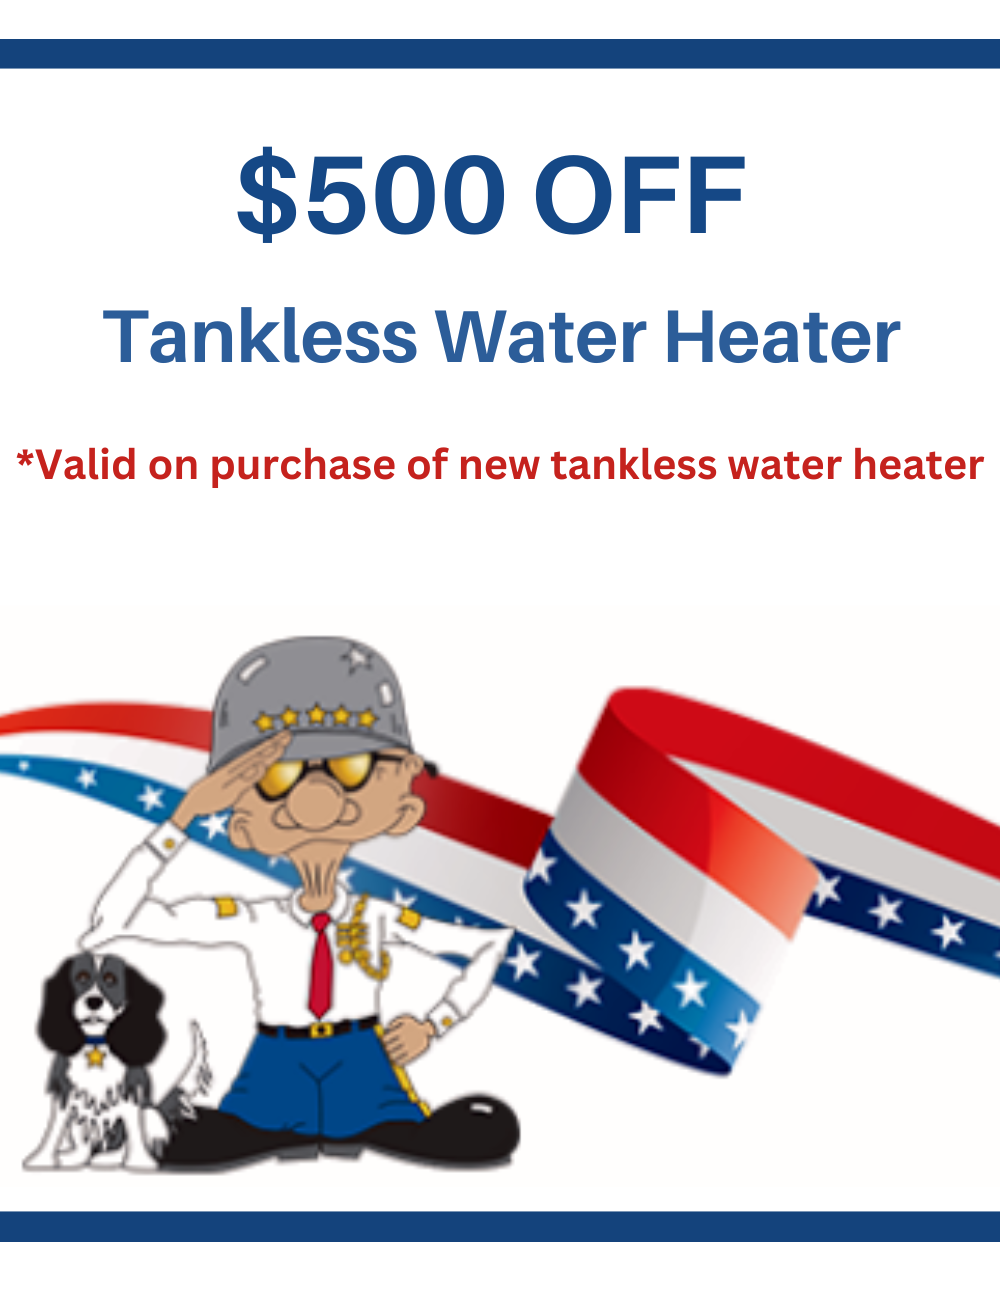 $500 OFF Tankless Water Heater General